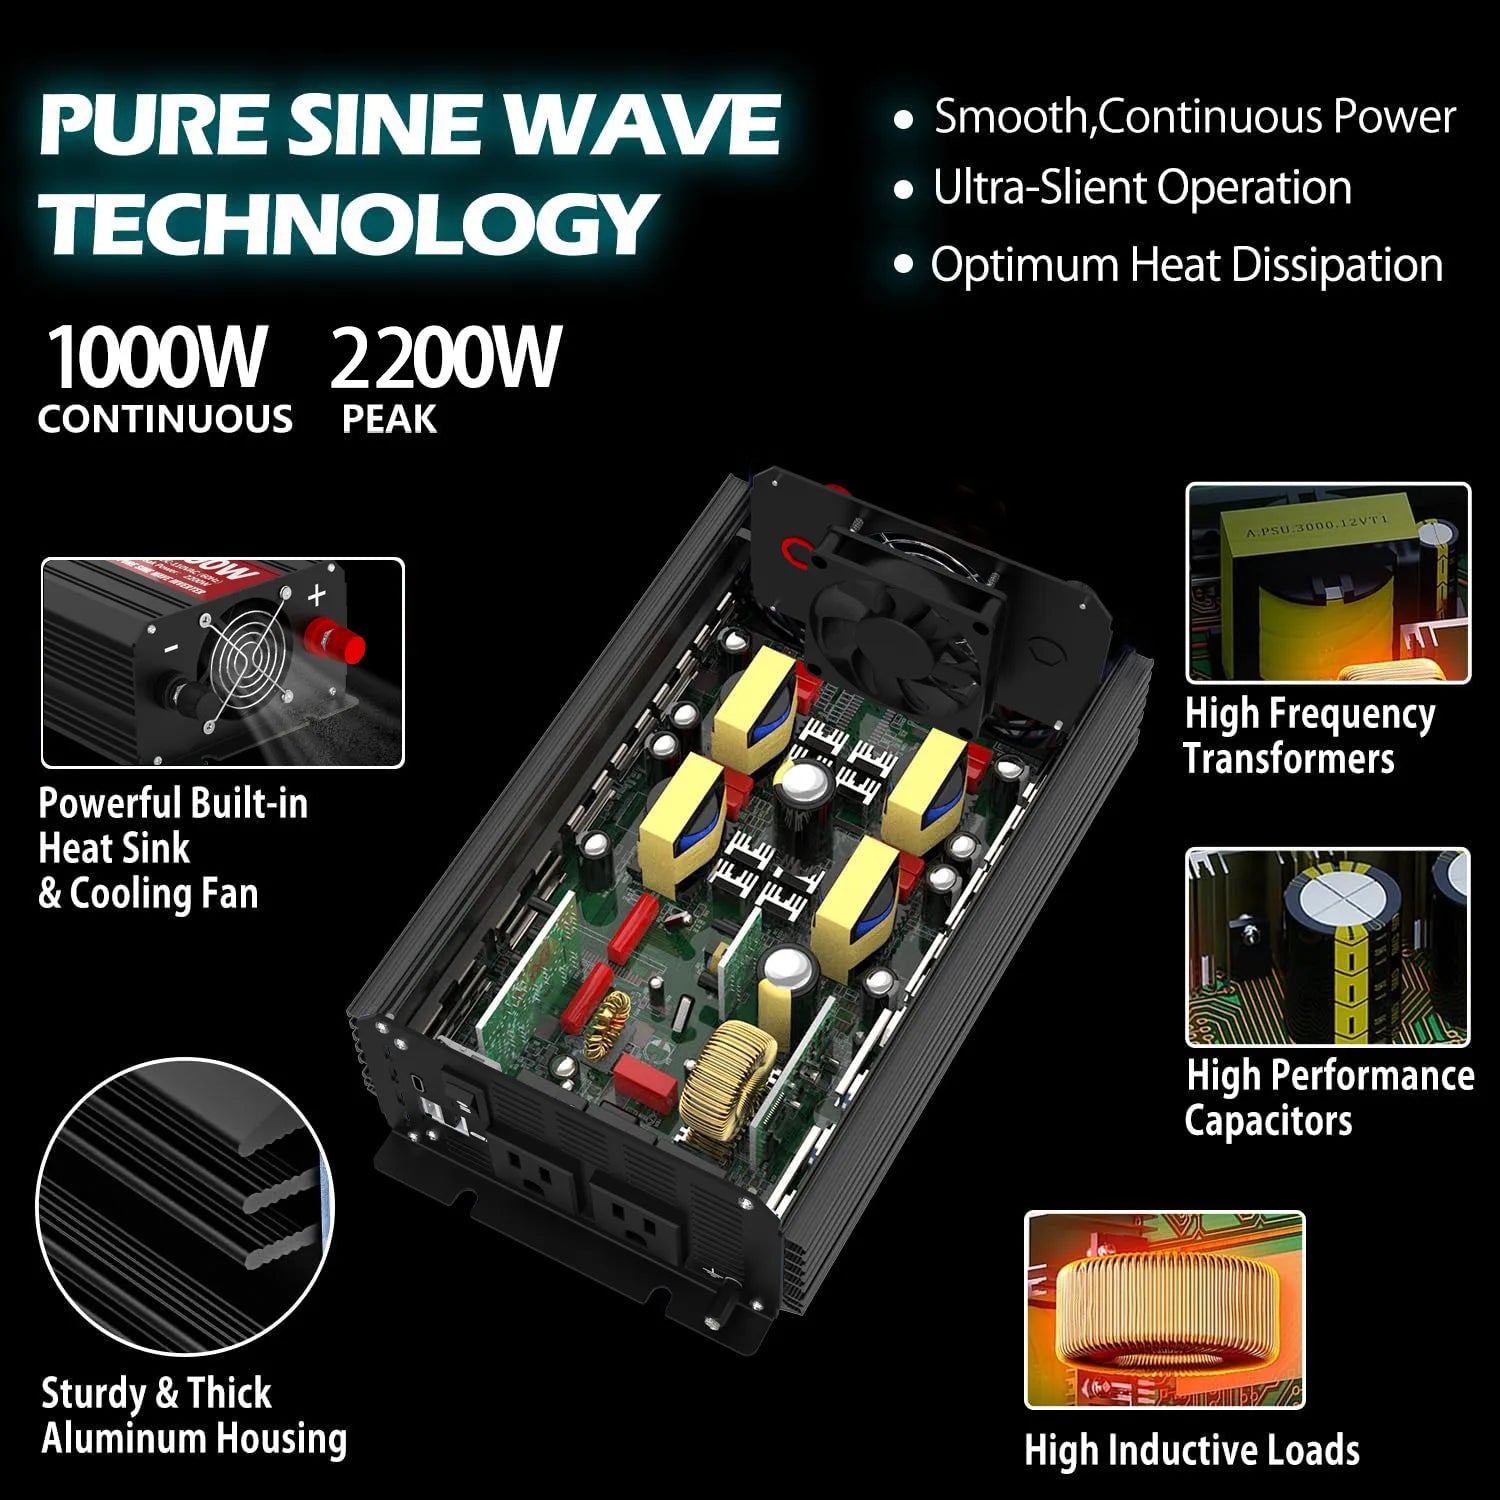 TYCORUN 1000w Inverter Pure Sine Wave 12V DC to AC Power Inverter for Car, Rv, Off Grid, Camp, Solar System